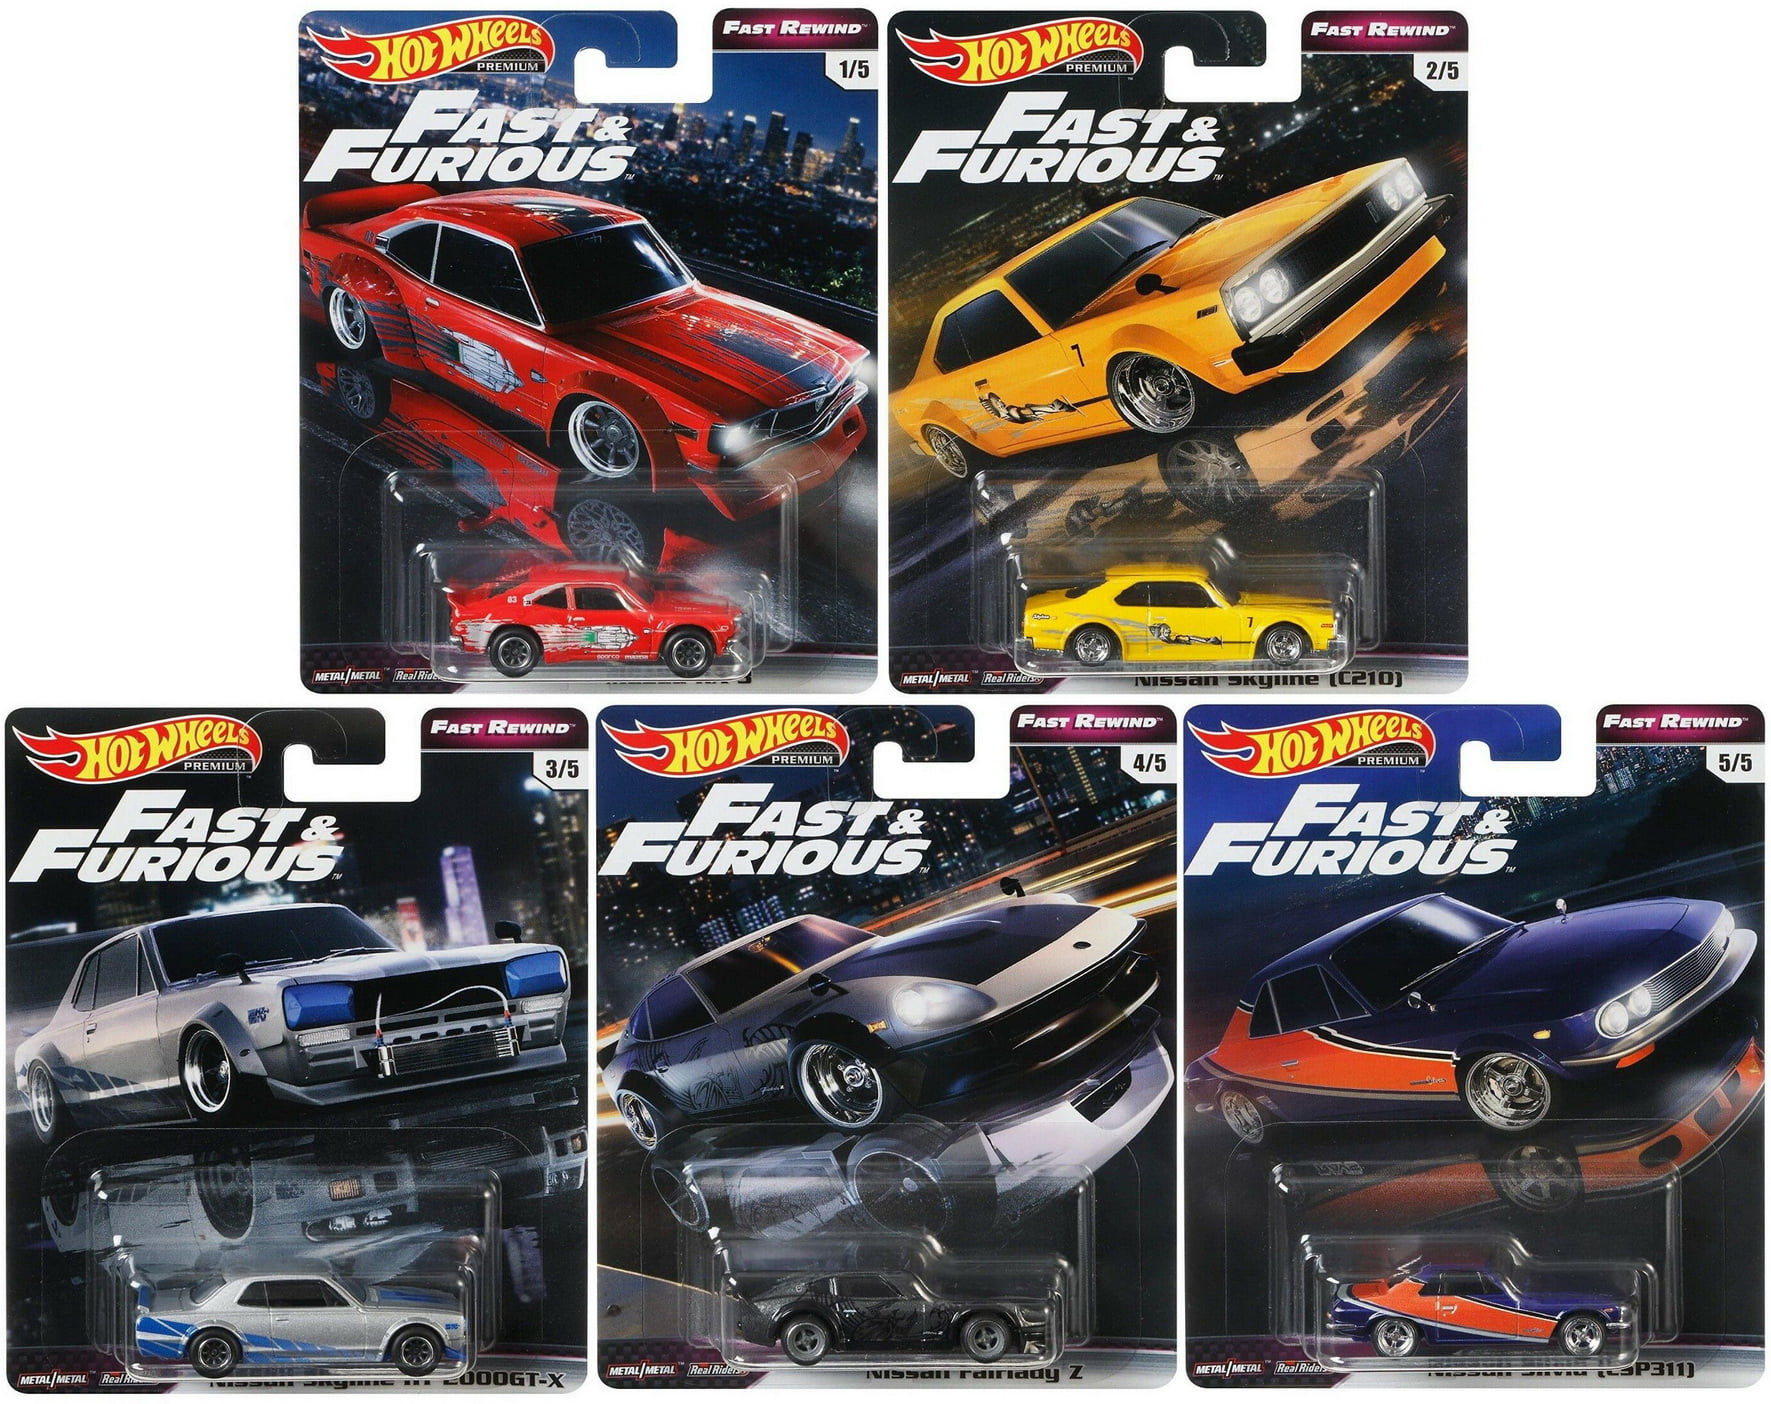 ng68-69 Hot wheels fast & furious fast rewind lot of 5 